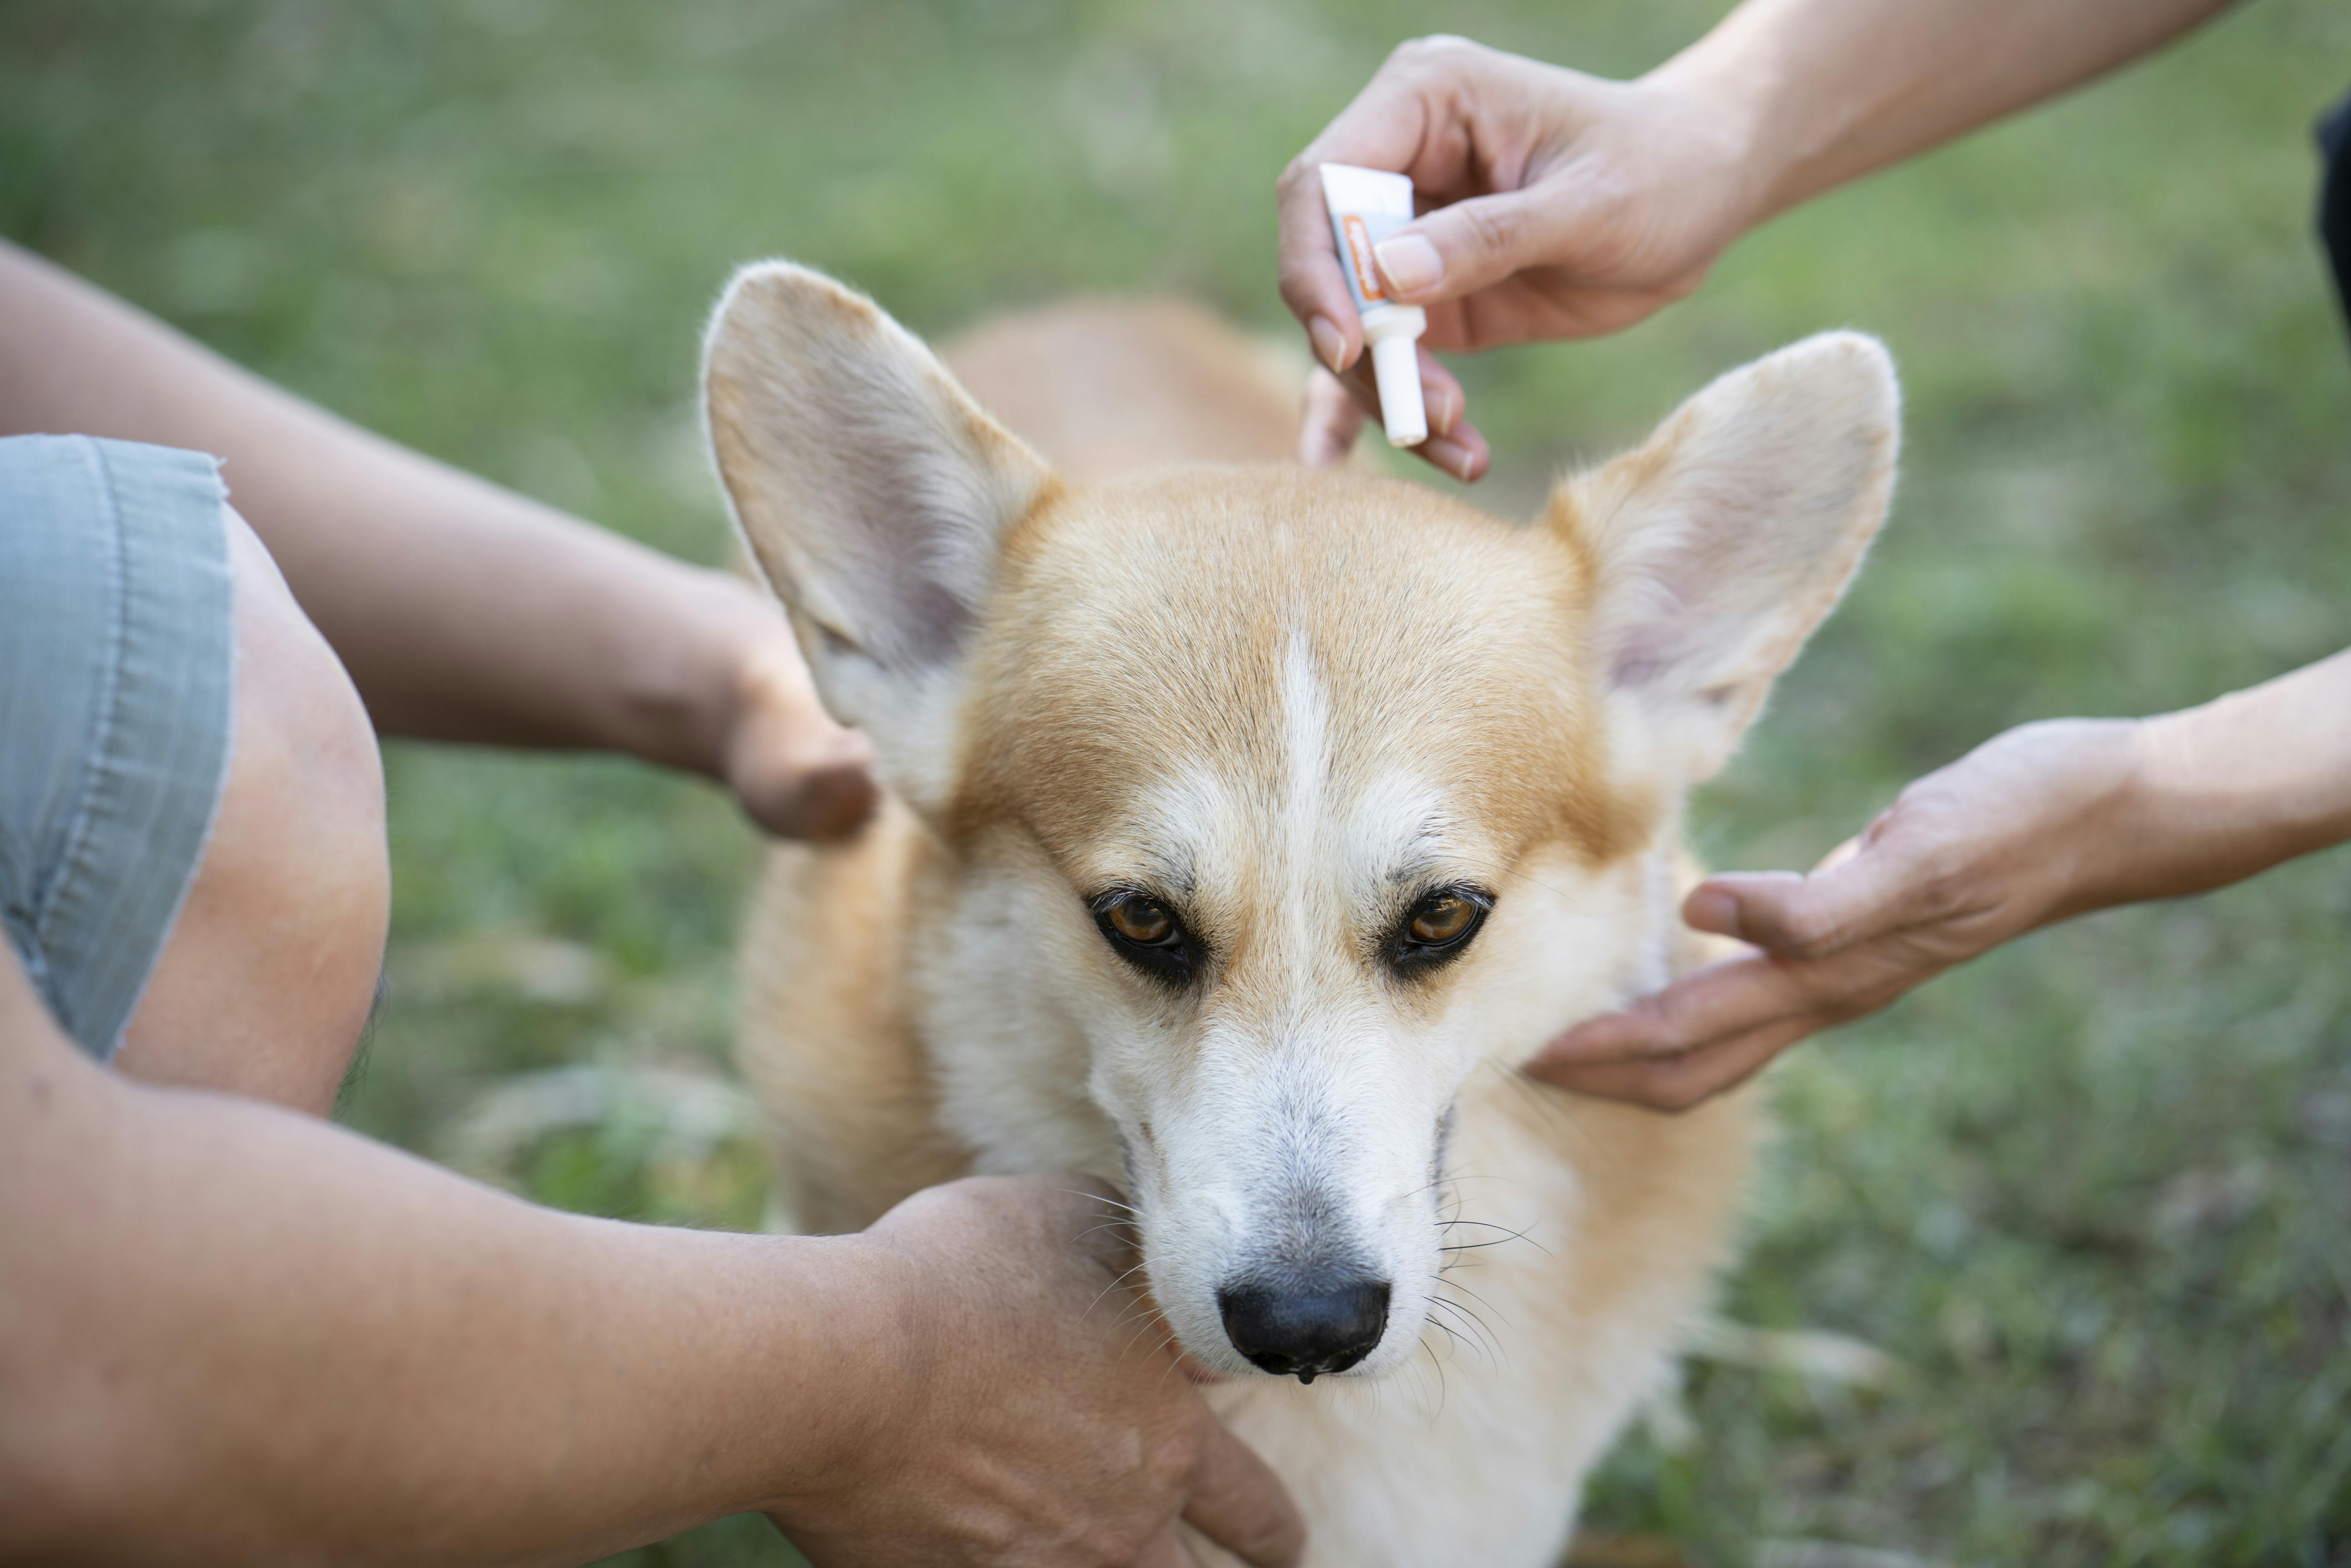 Two people's hands holding a dog still while one person applies flea medicine to the back of the dog's neck.